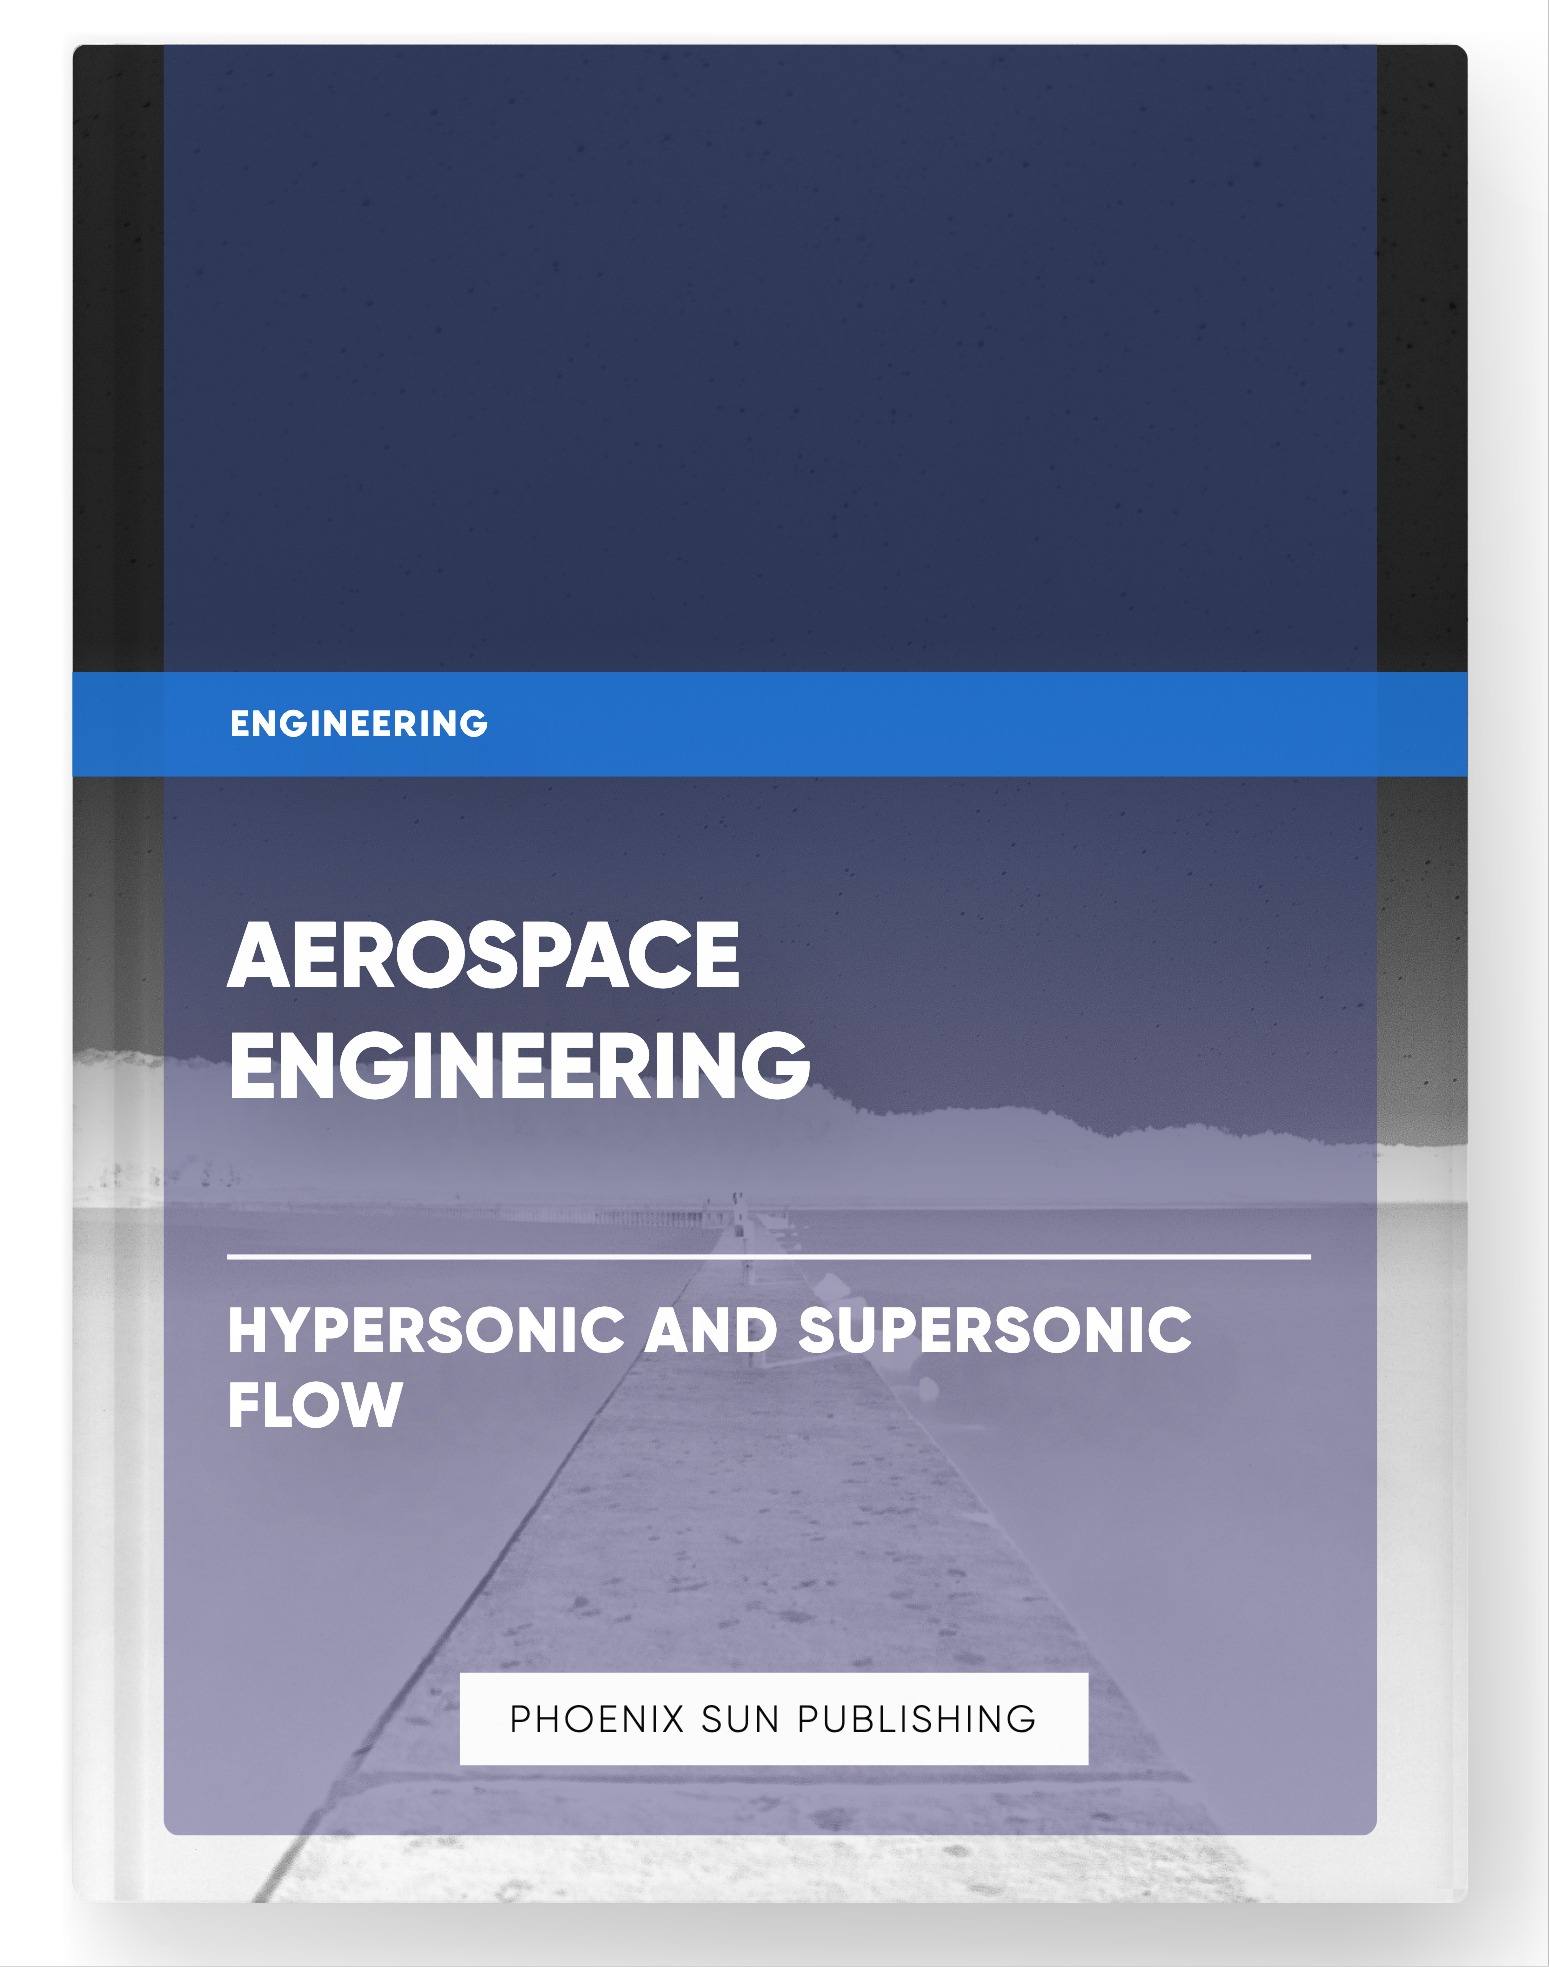 Aerospace Engineering – Hypersonic and Supersonic Flow